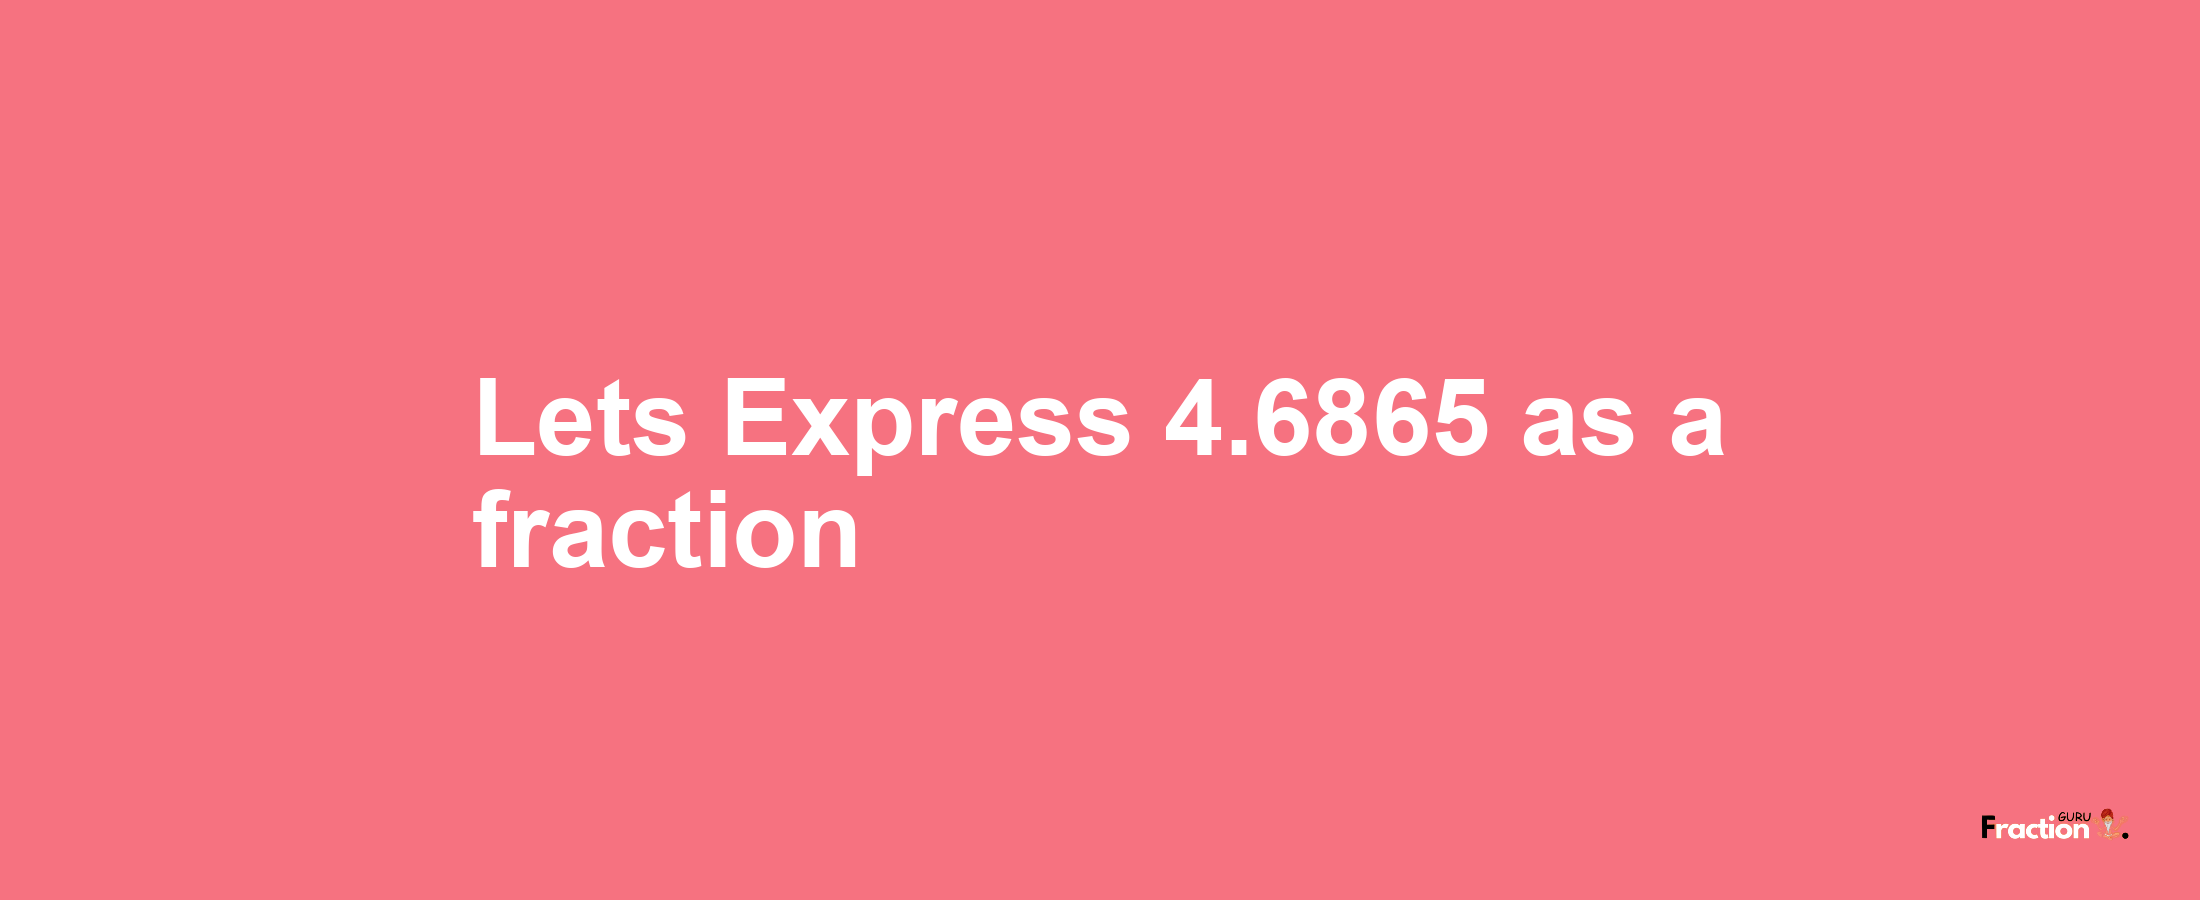 Lets Express 4.6865 as afraction